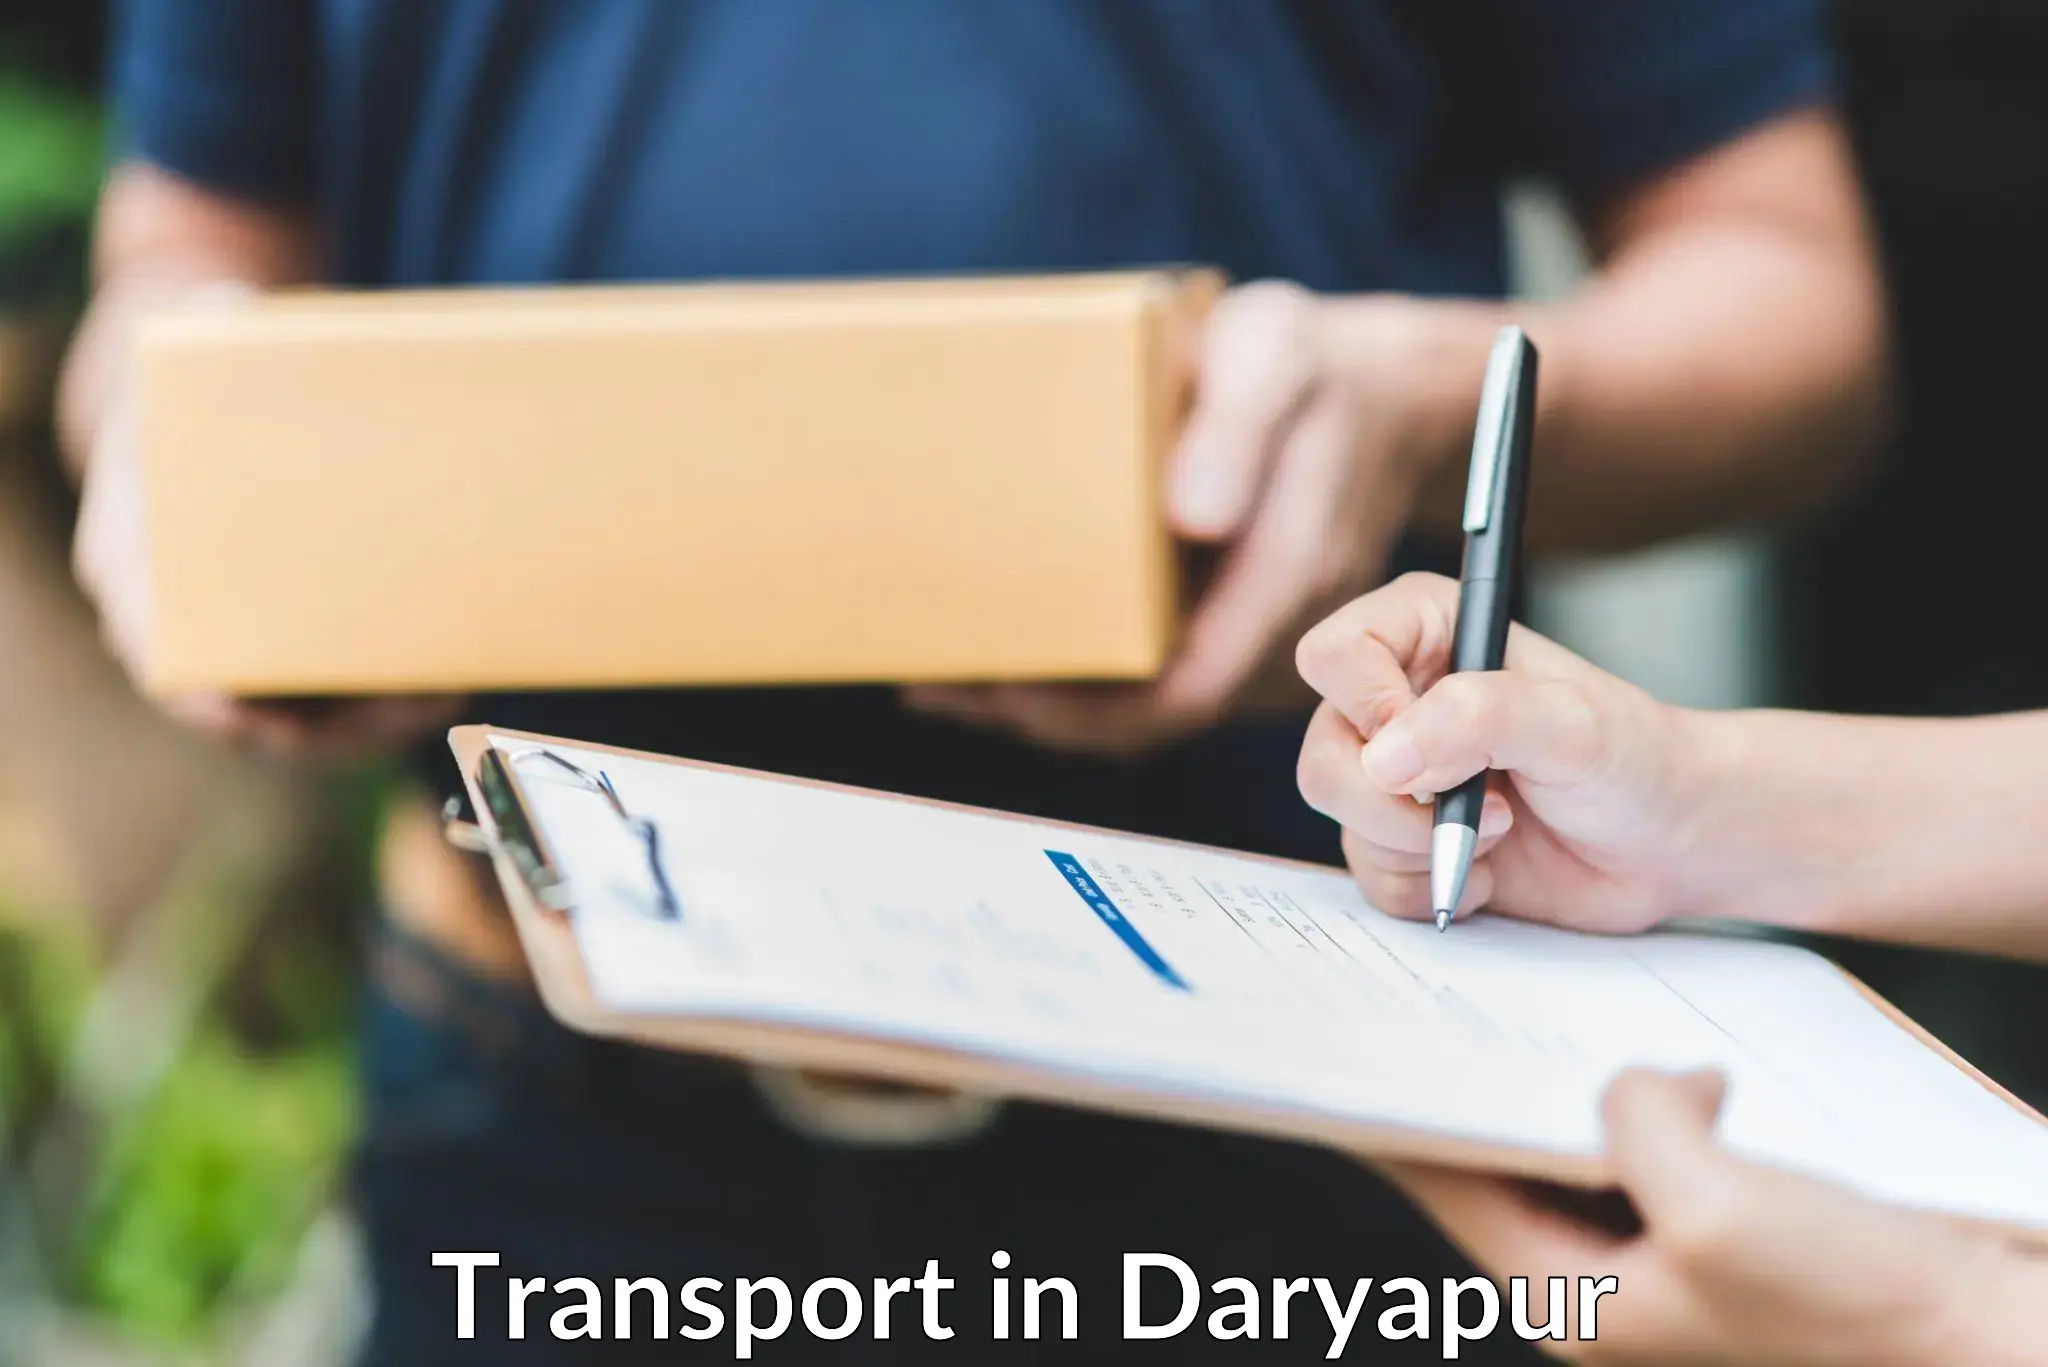 Transport shared services in Daryapur